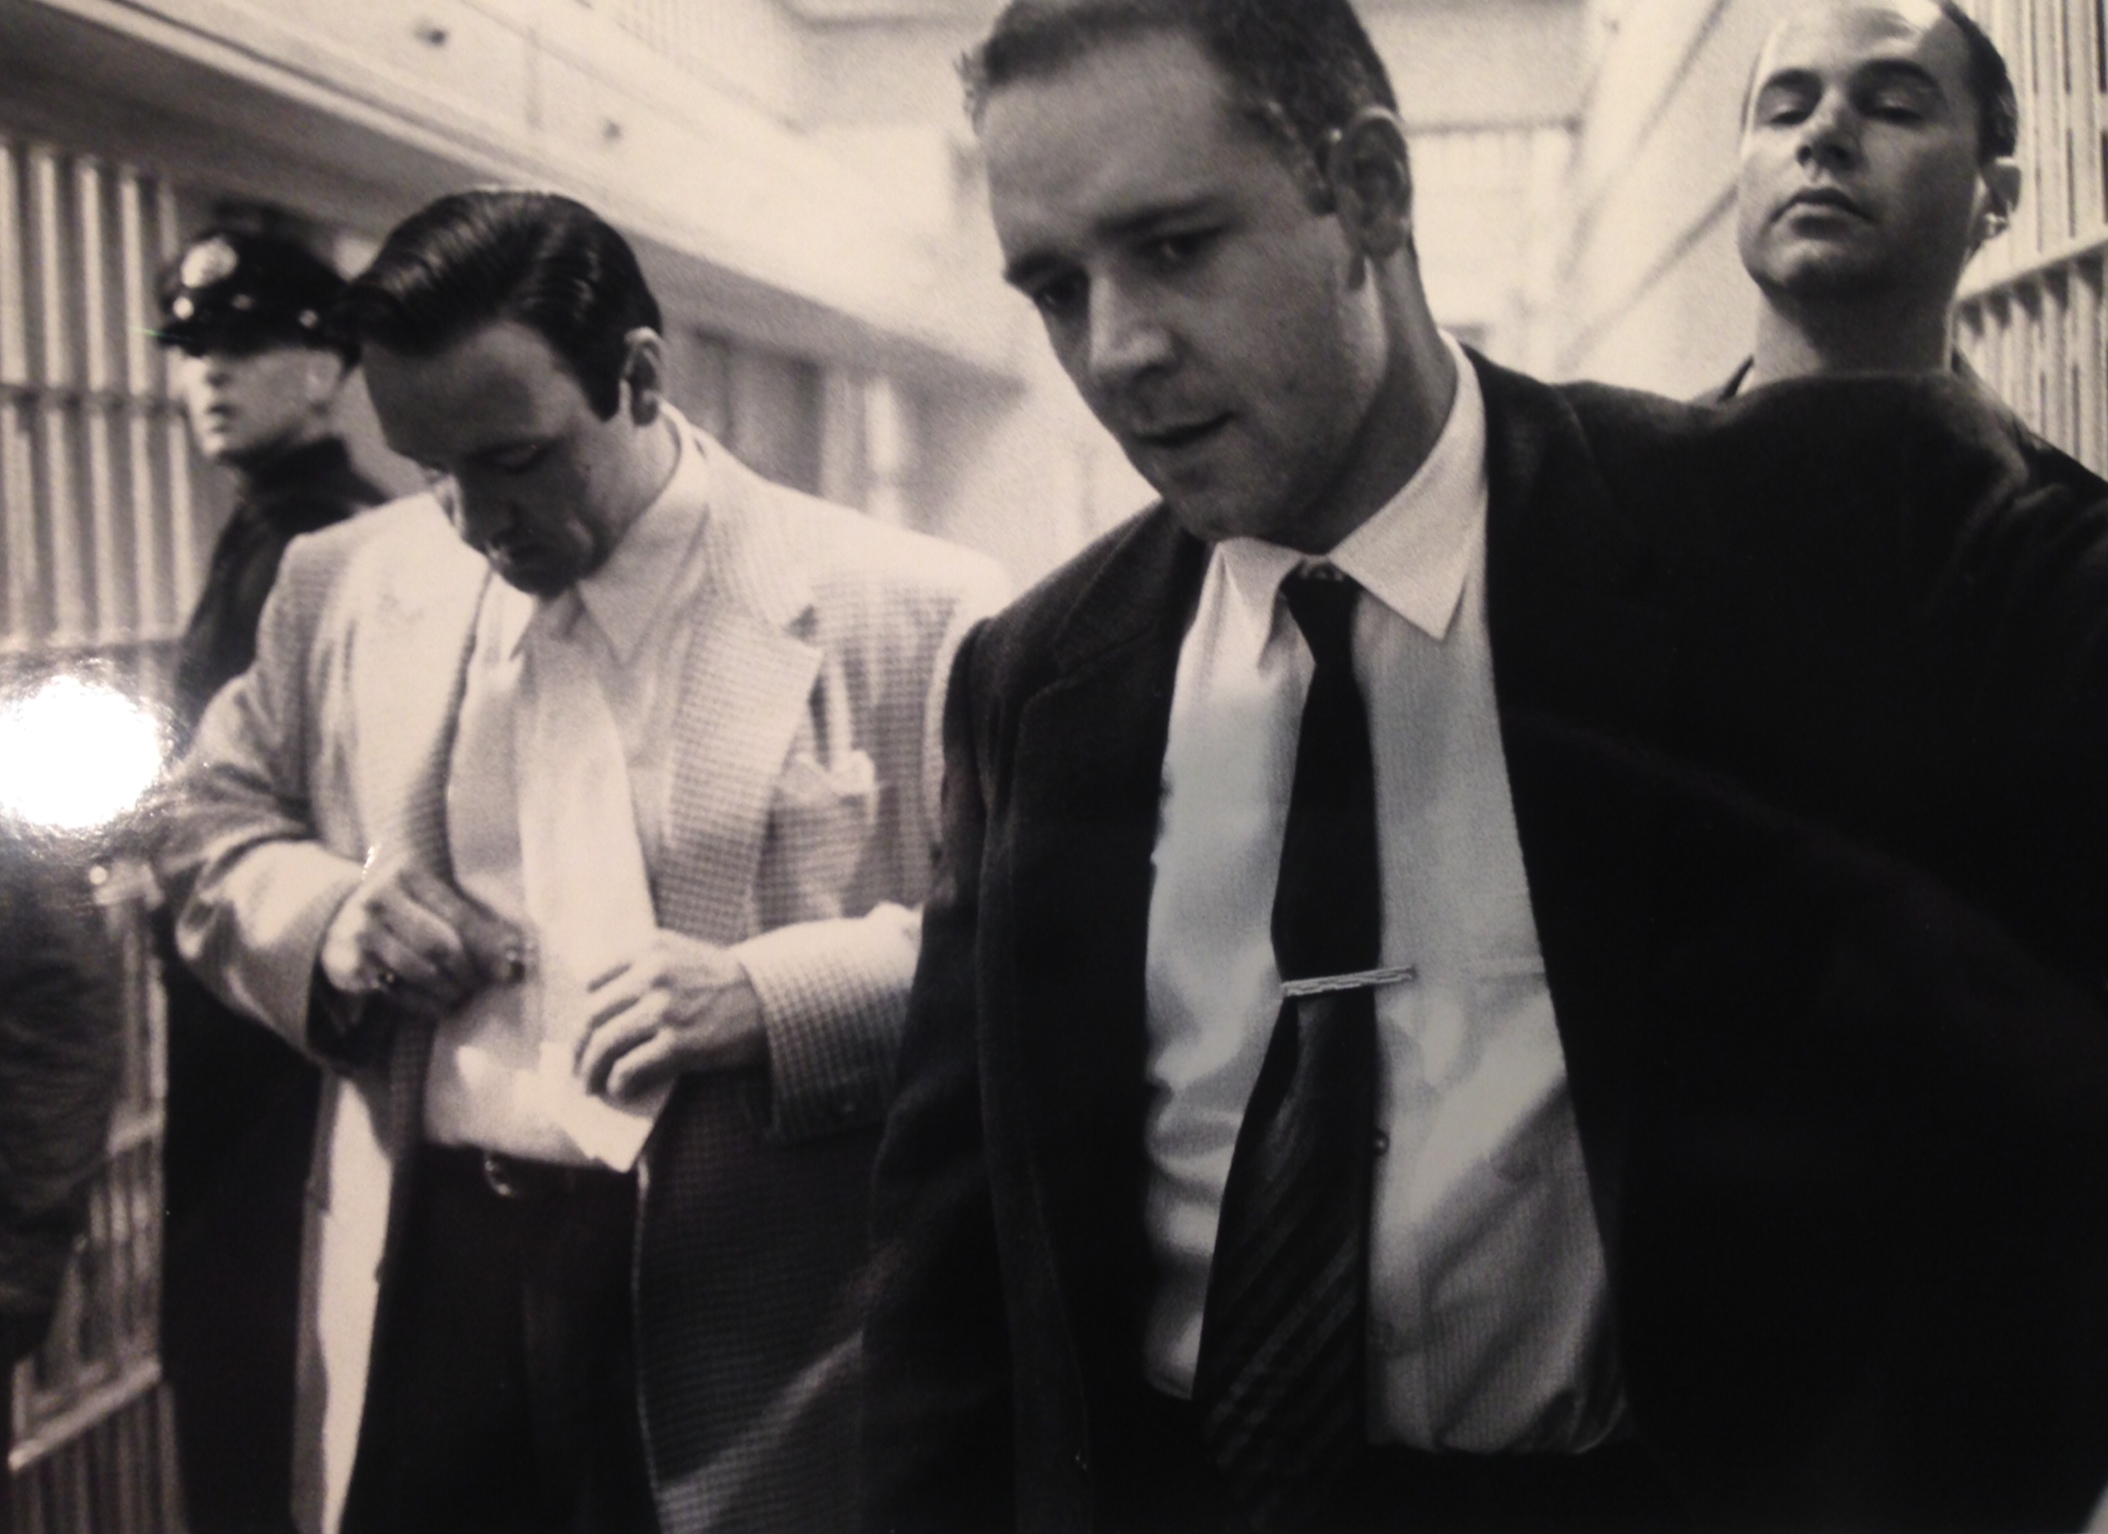 L.A. Confidential, w/Russell Crowe & Kevin Spacey